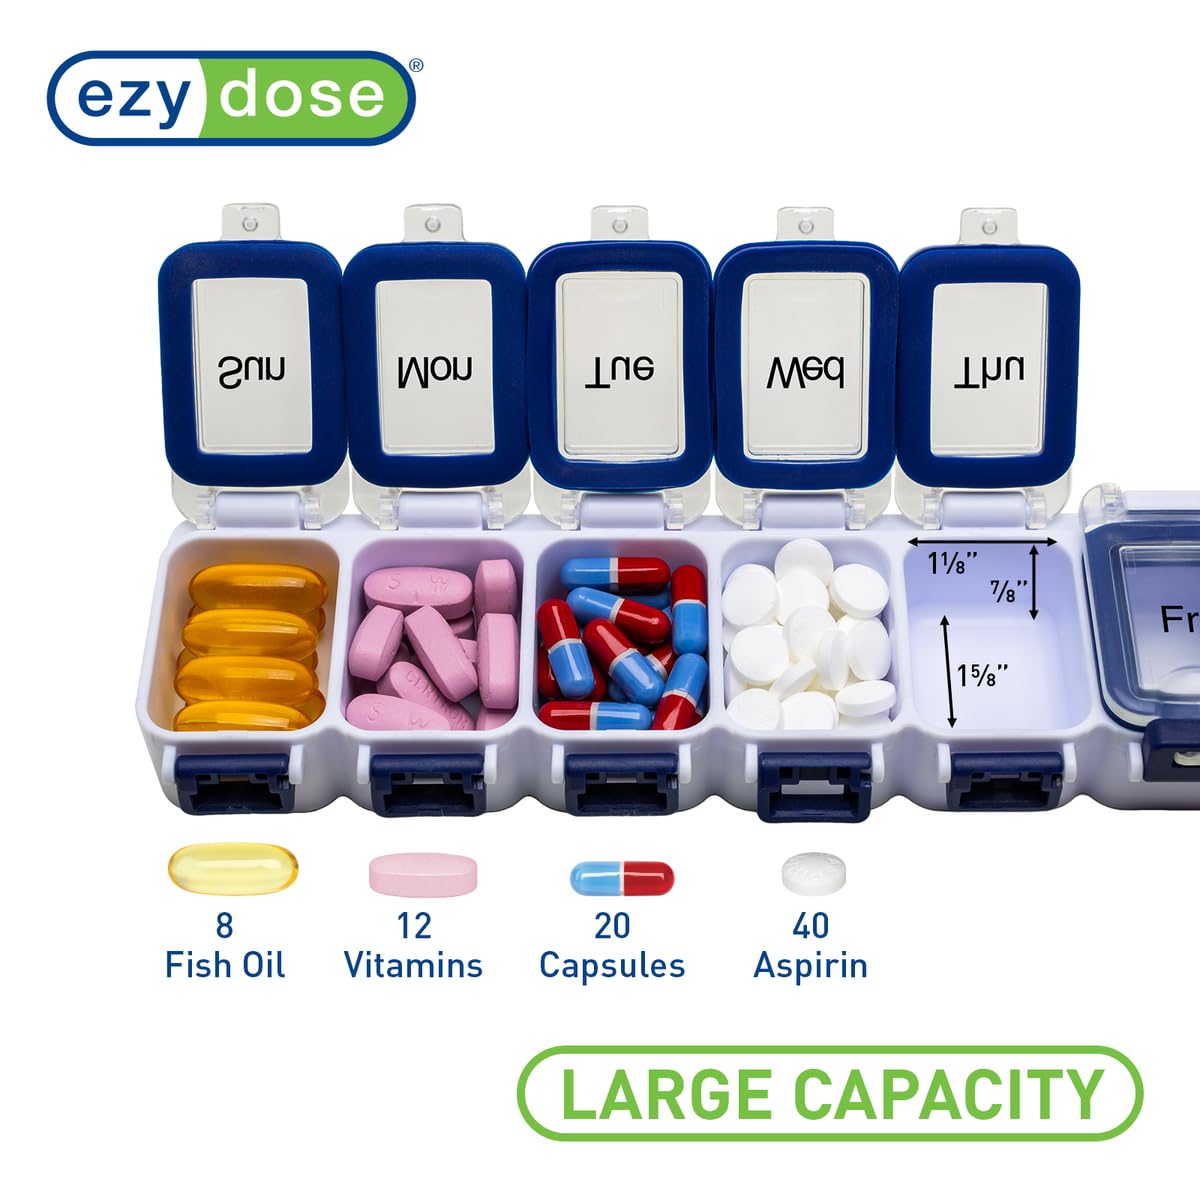 EZY DOSE Weekly (7-Day) Pill Planner, Medicine Case, Vitamin Organizer Box, Waterproof Locking Compartments to Secure Prescription Medication and Prevent Accidental Spilling, Blue